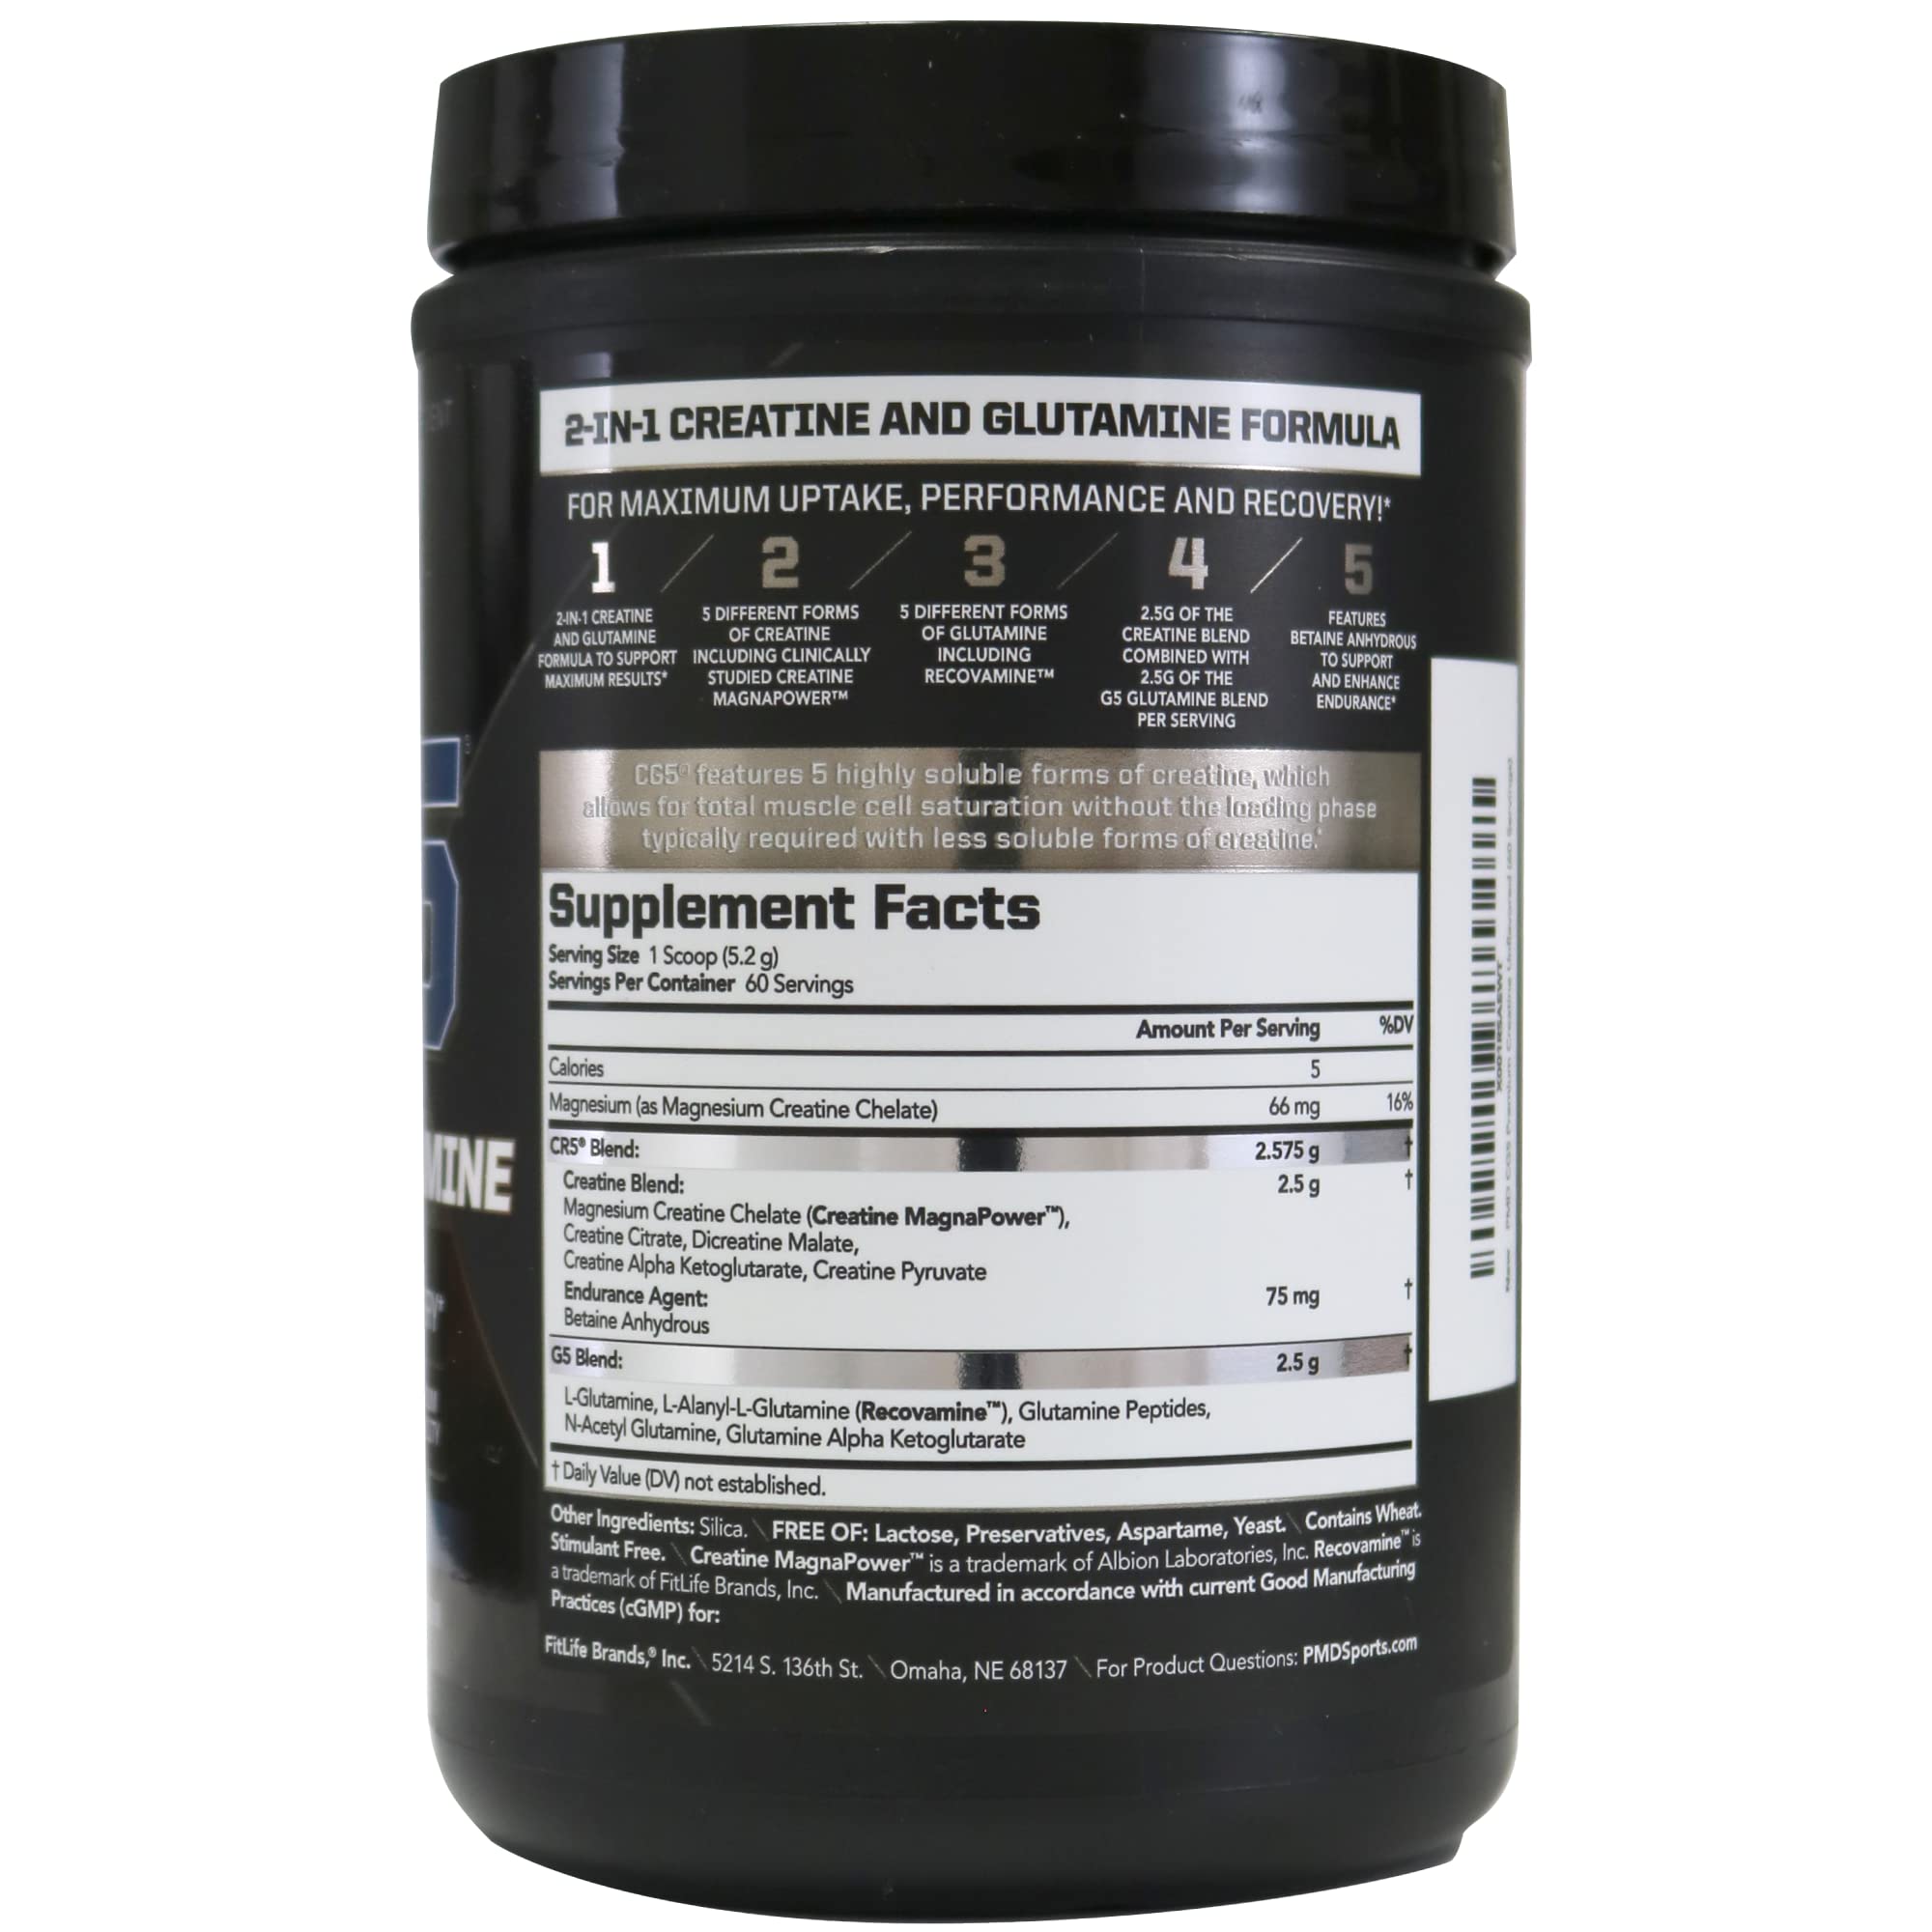 PMD Sports CG5 - Premium Creatine and L Glutamine Powder - Maximum Strength Power Recovery, Build Lean Muscle, Increase Workout Performance - Pre Workout and Post Workout - Unflavored (60 Servings)